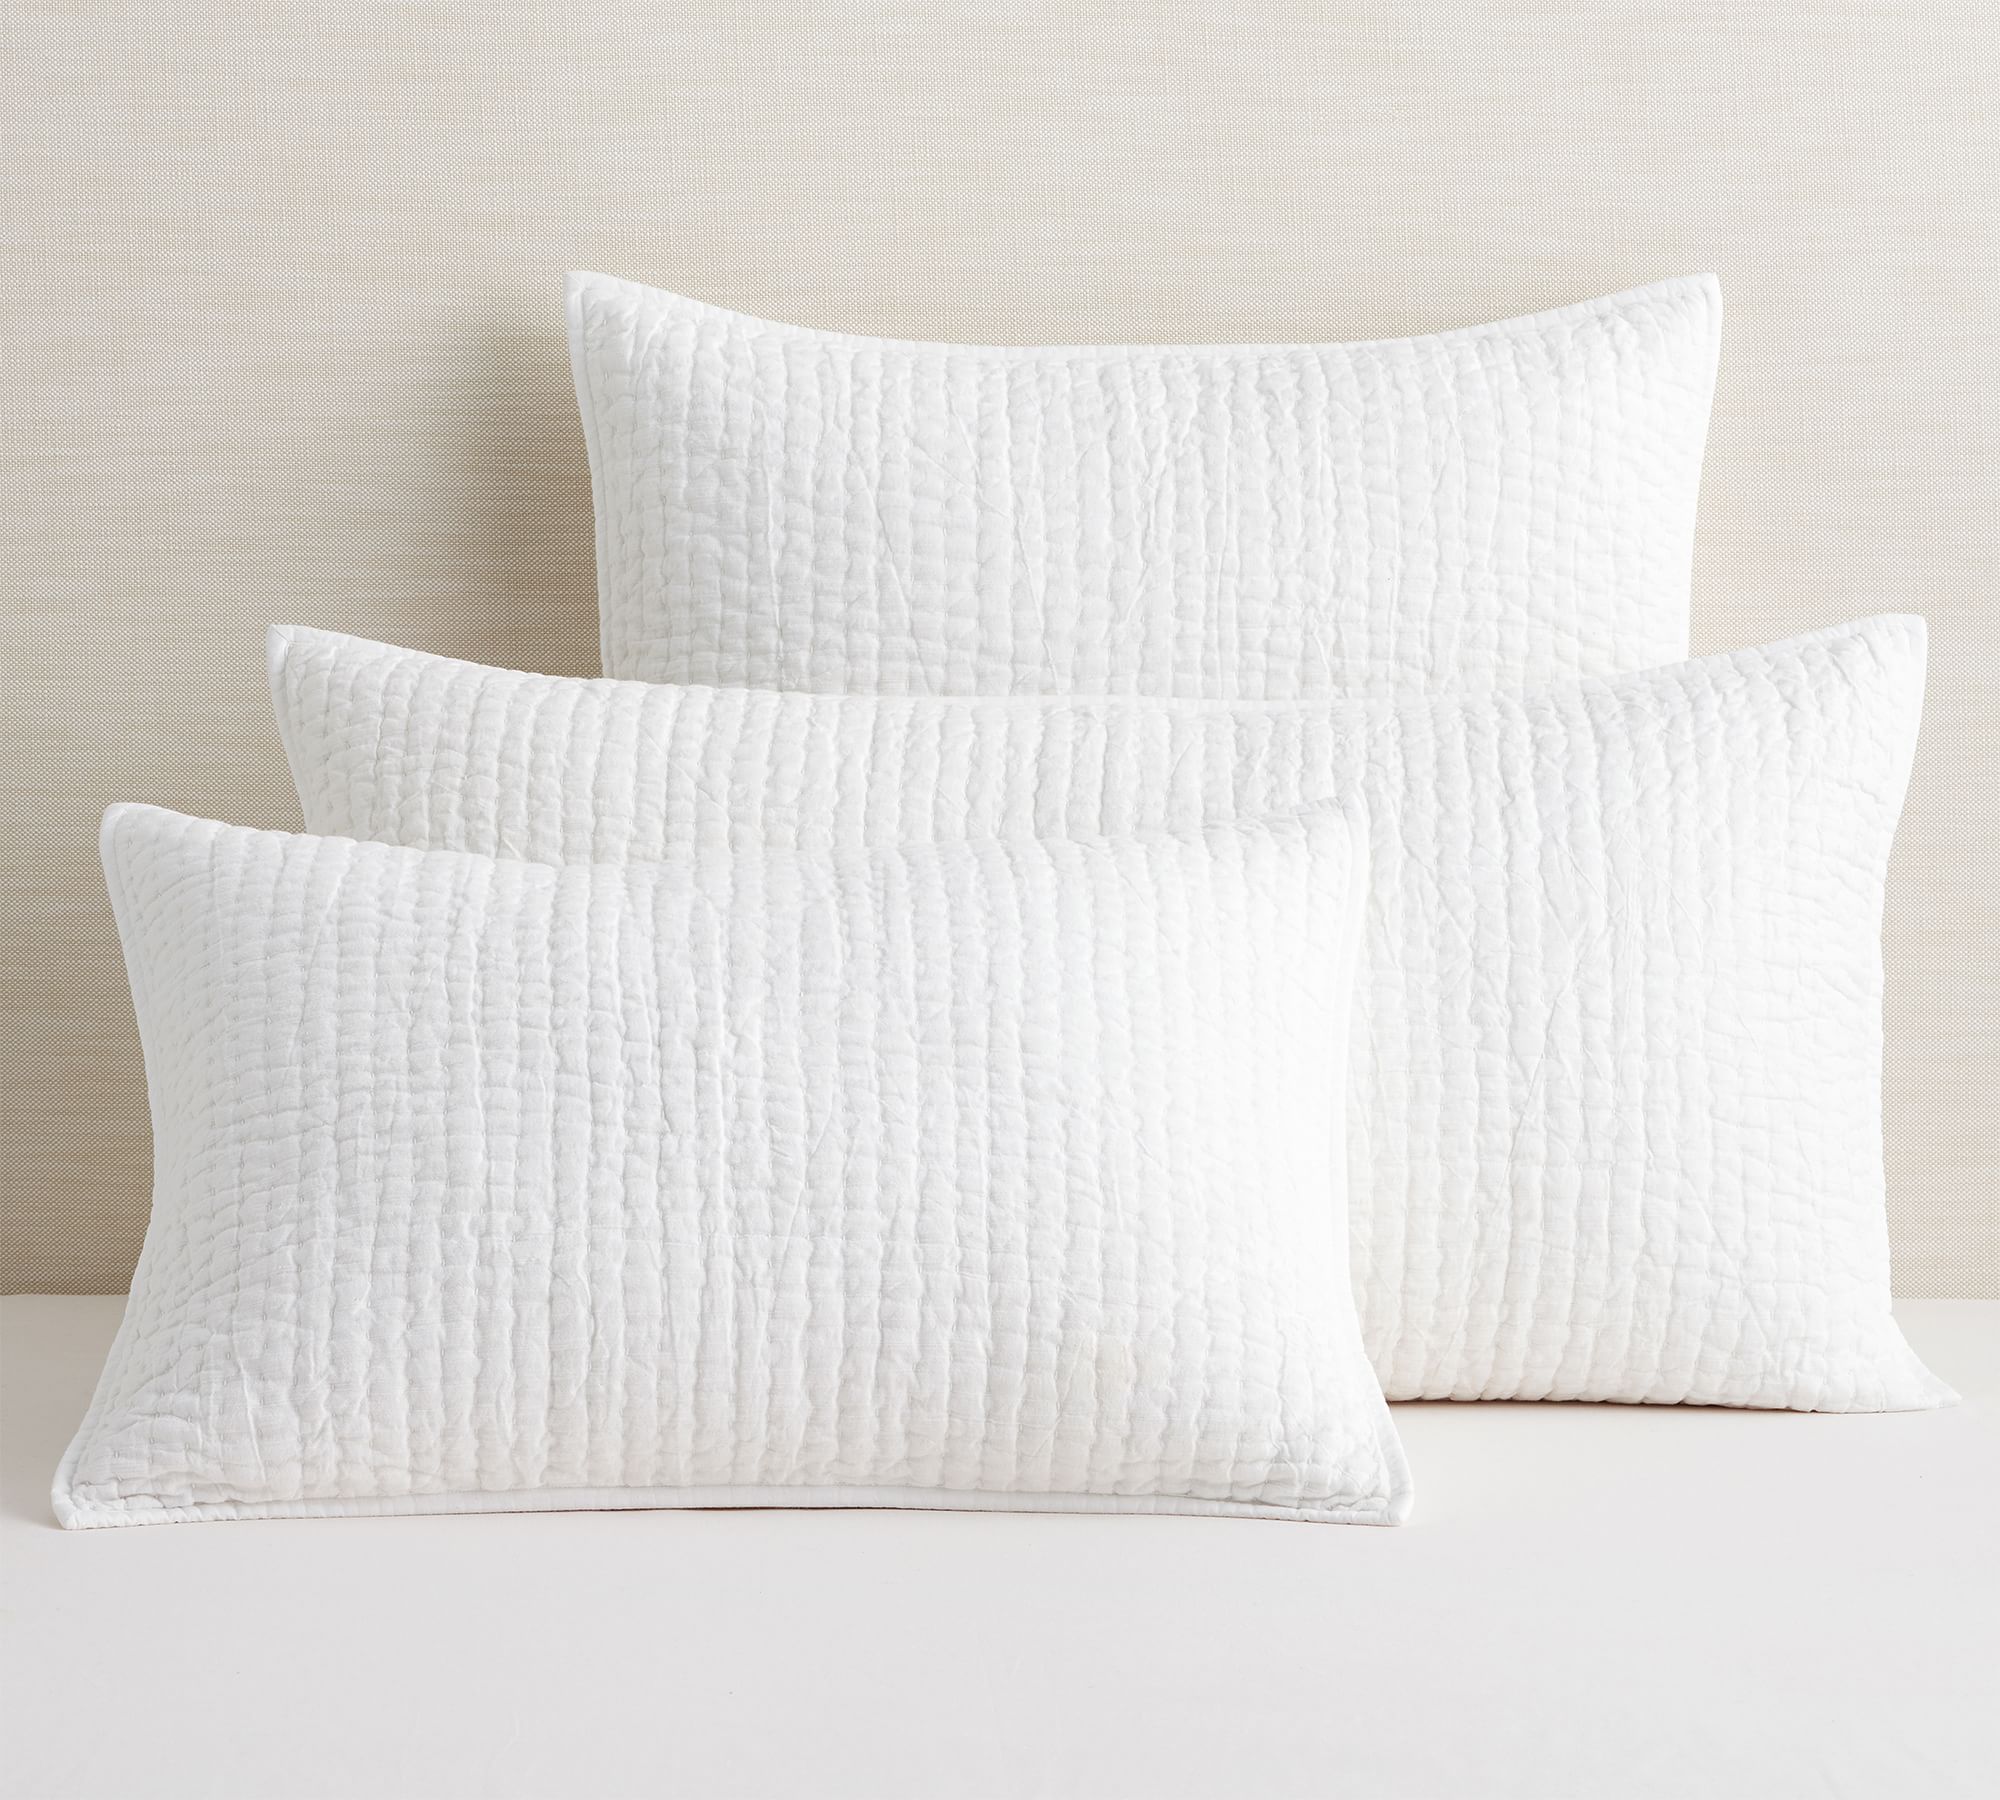 quilted standard sham pillows to use on a bed for layering